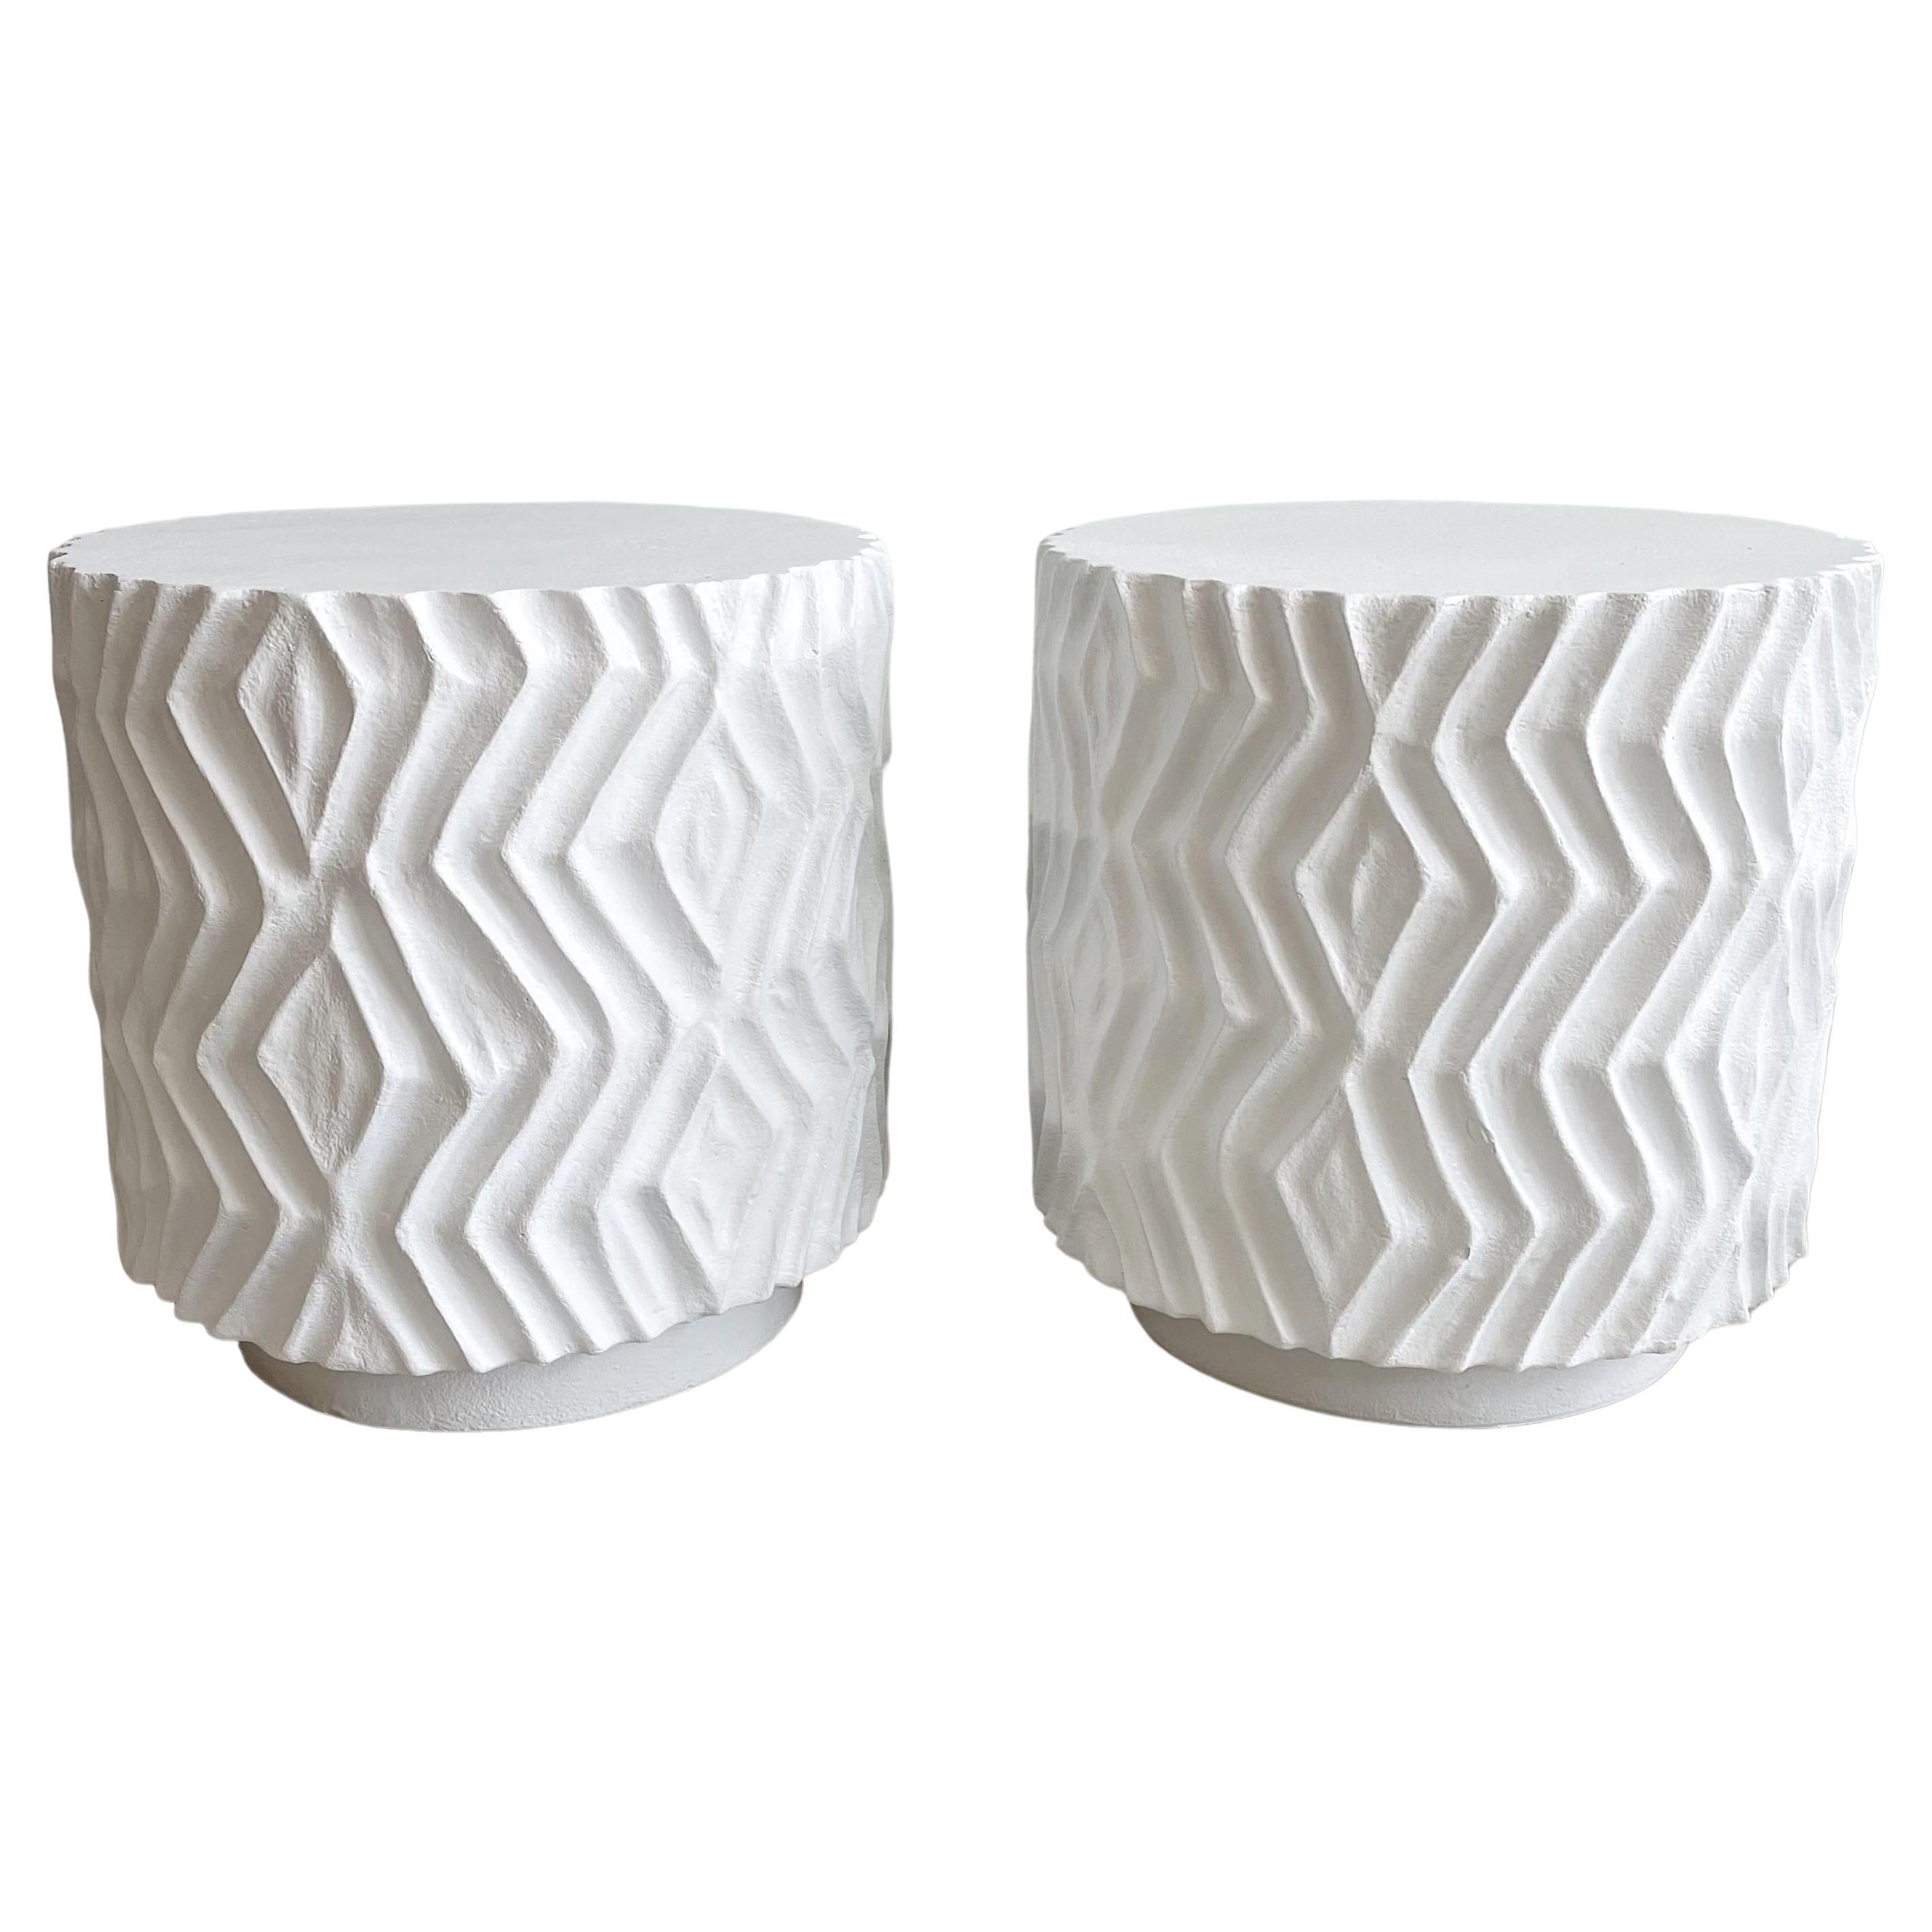 Pair Incised Plaster Cylindrycal Pedestal End Tables